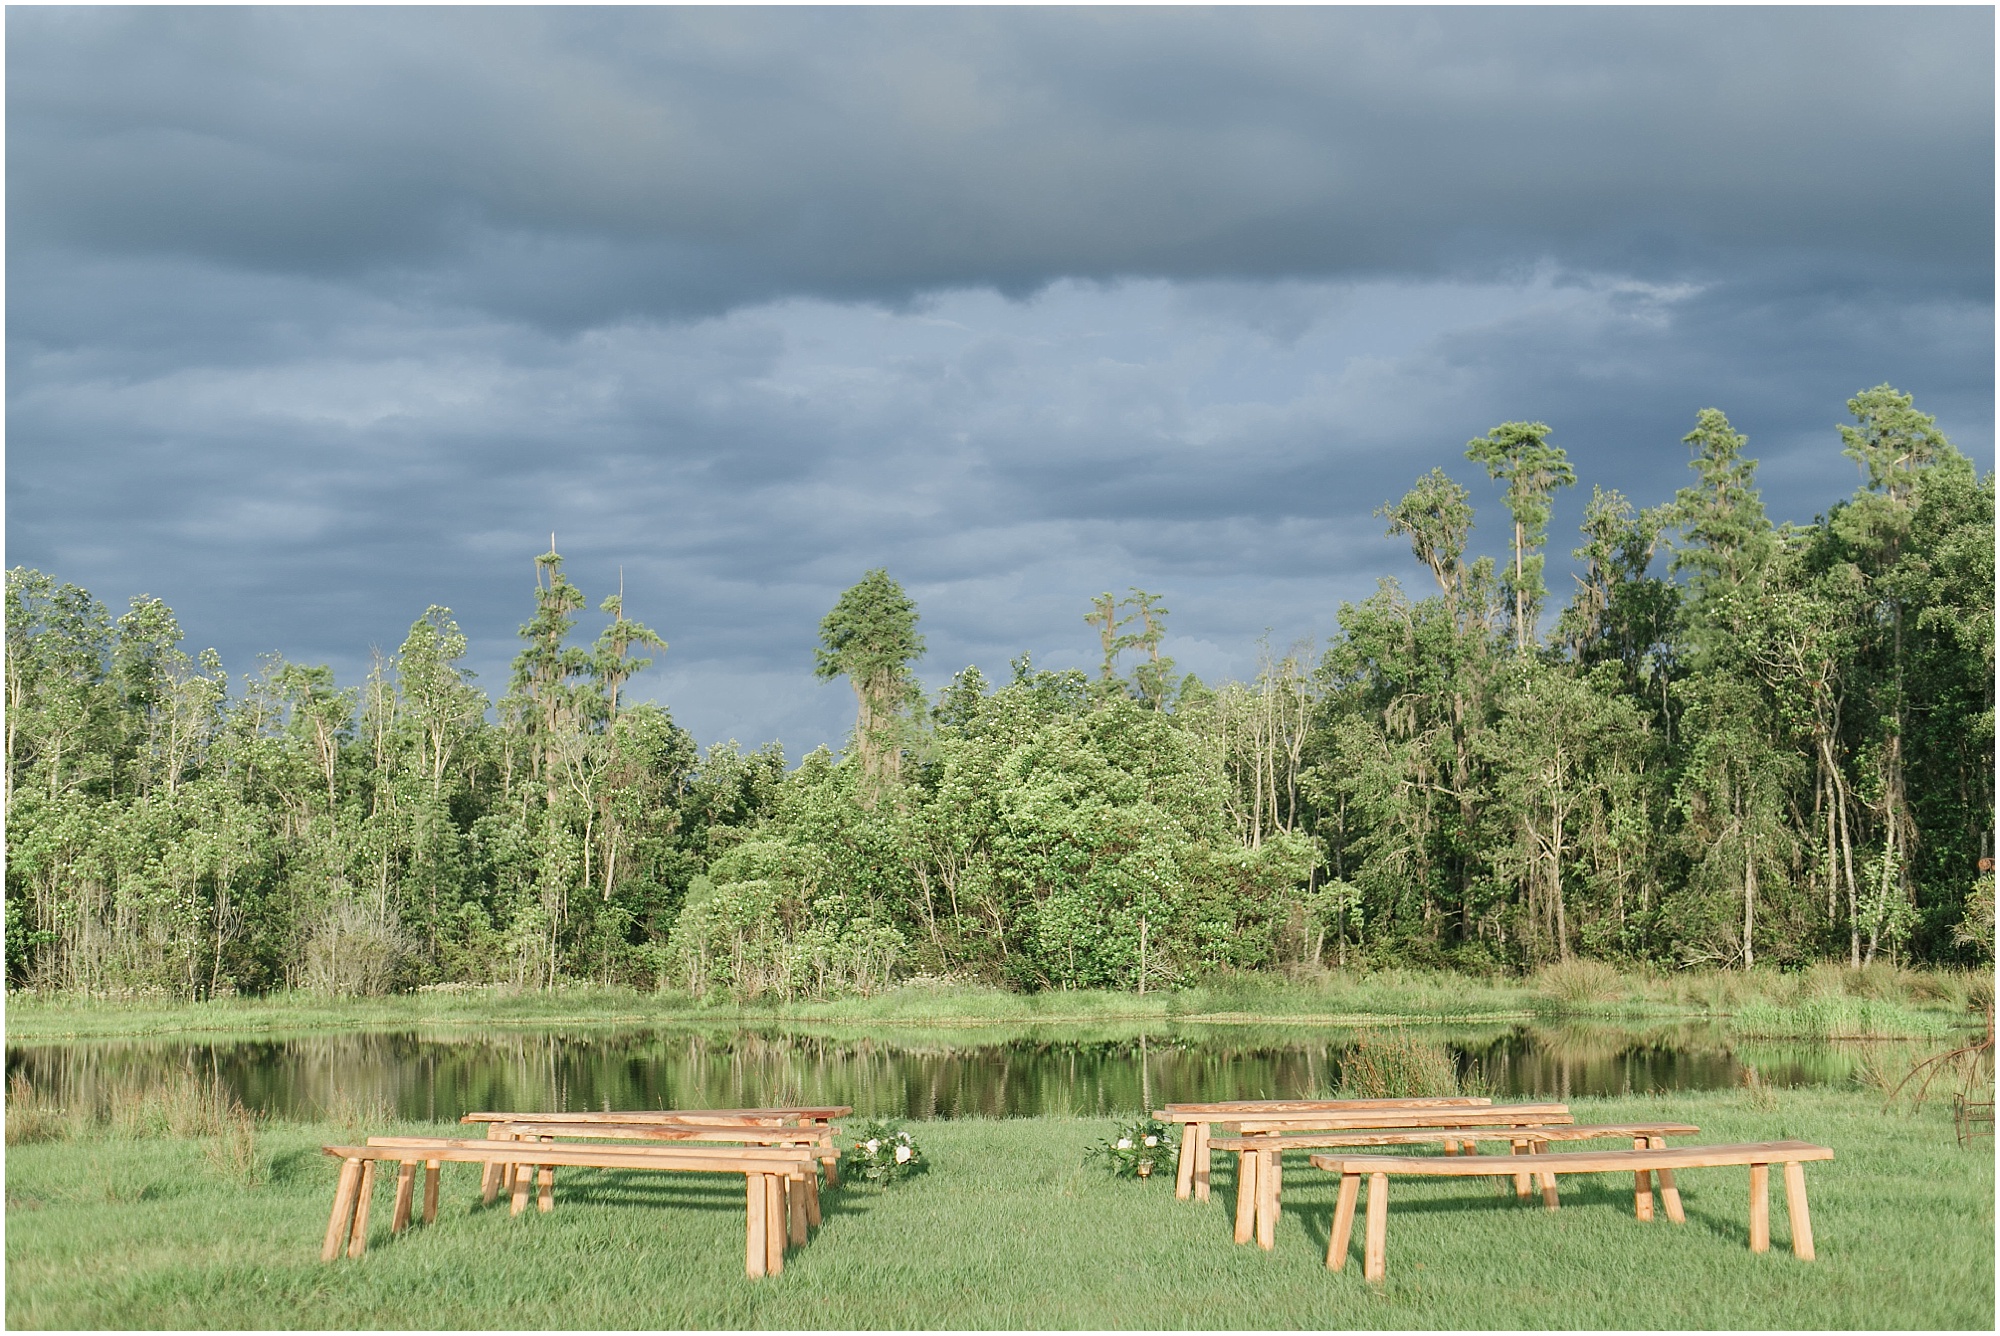 Outdoor ceremony space with a storm in the background.